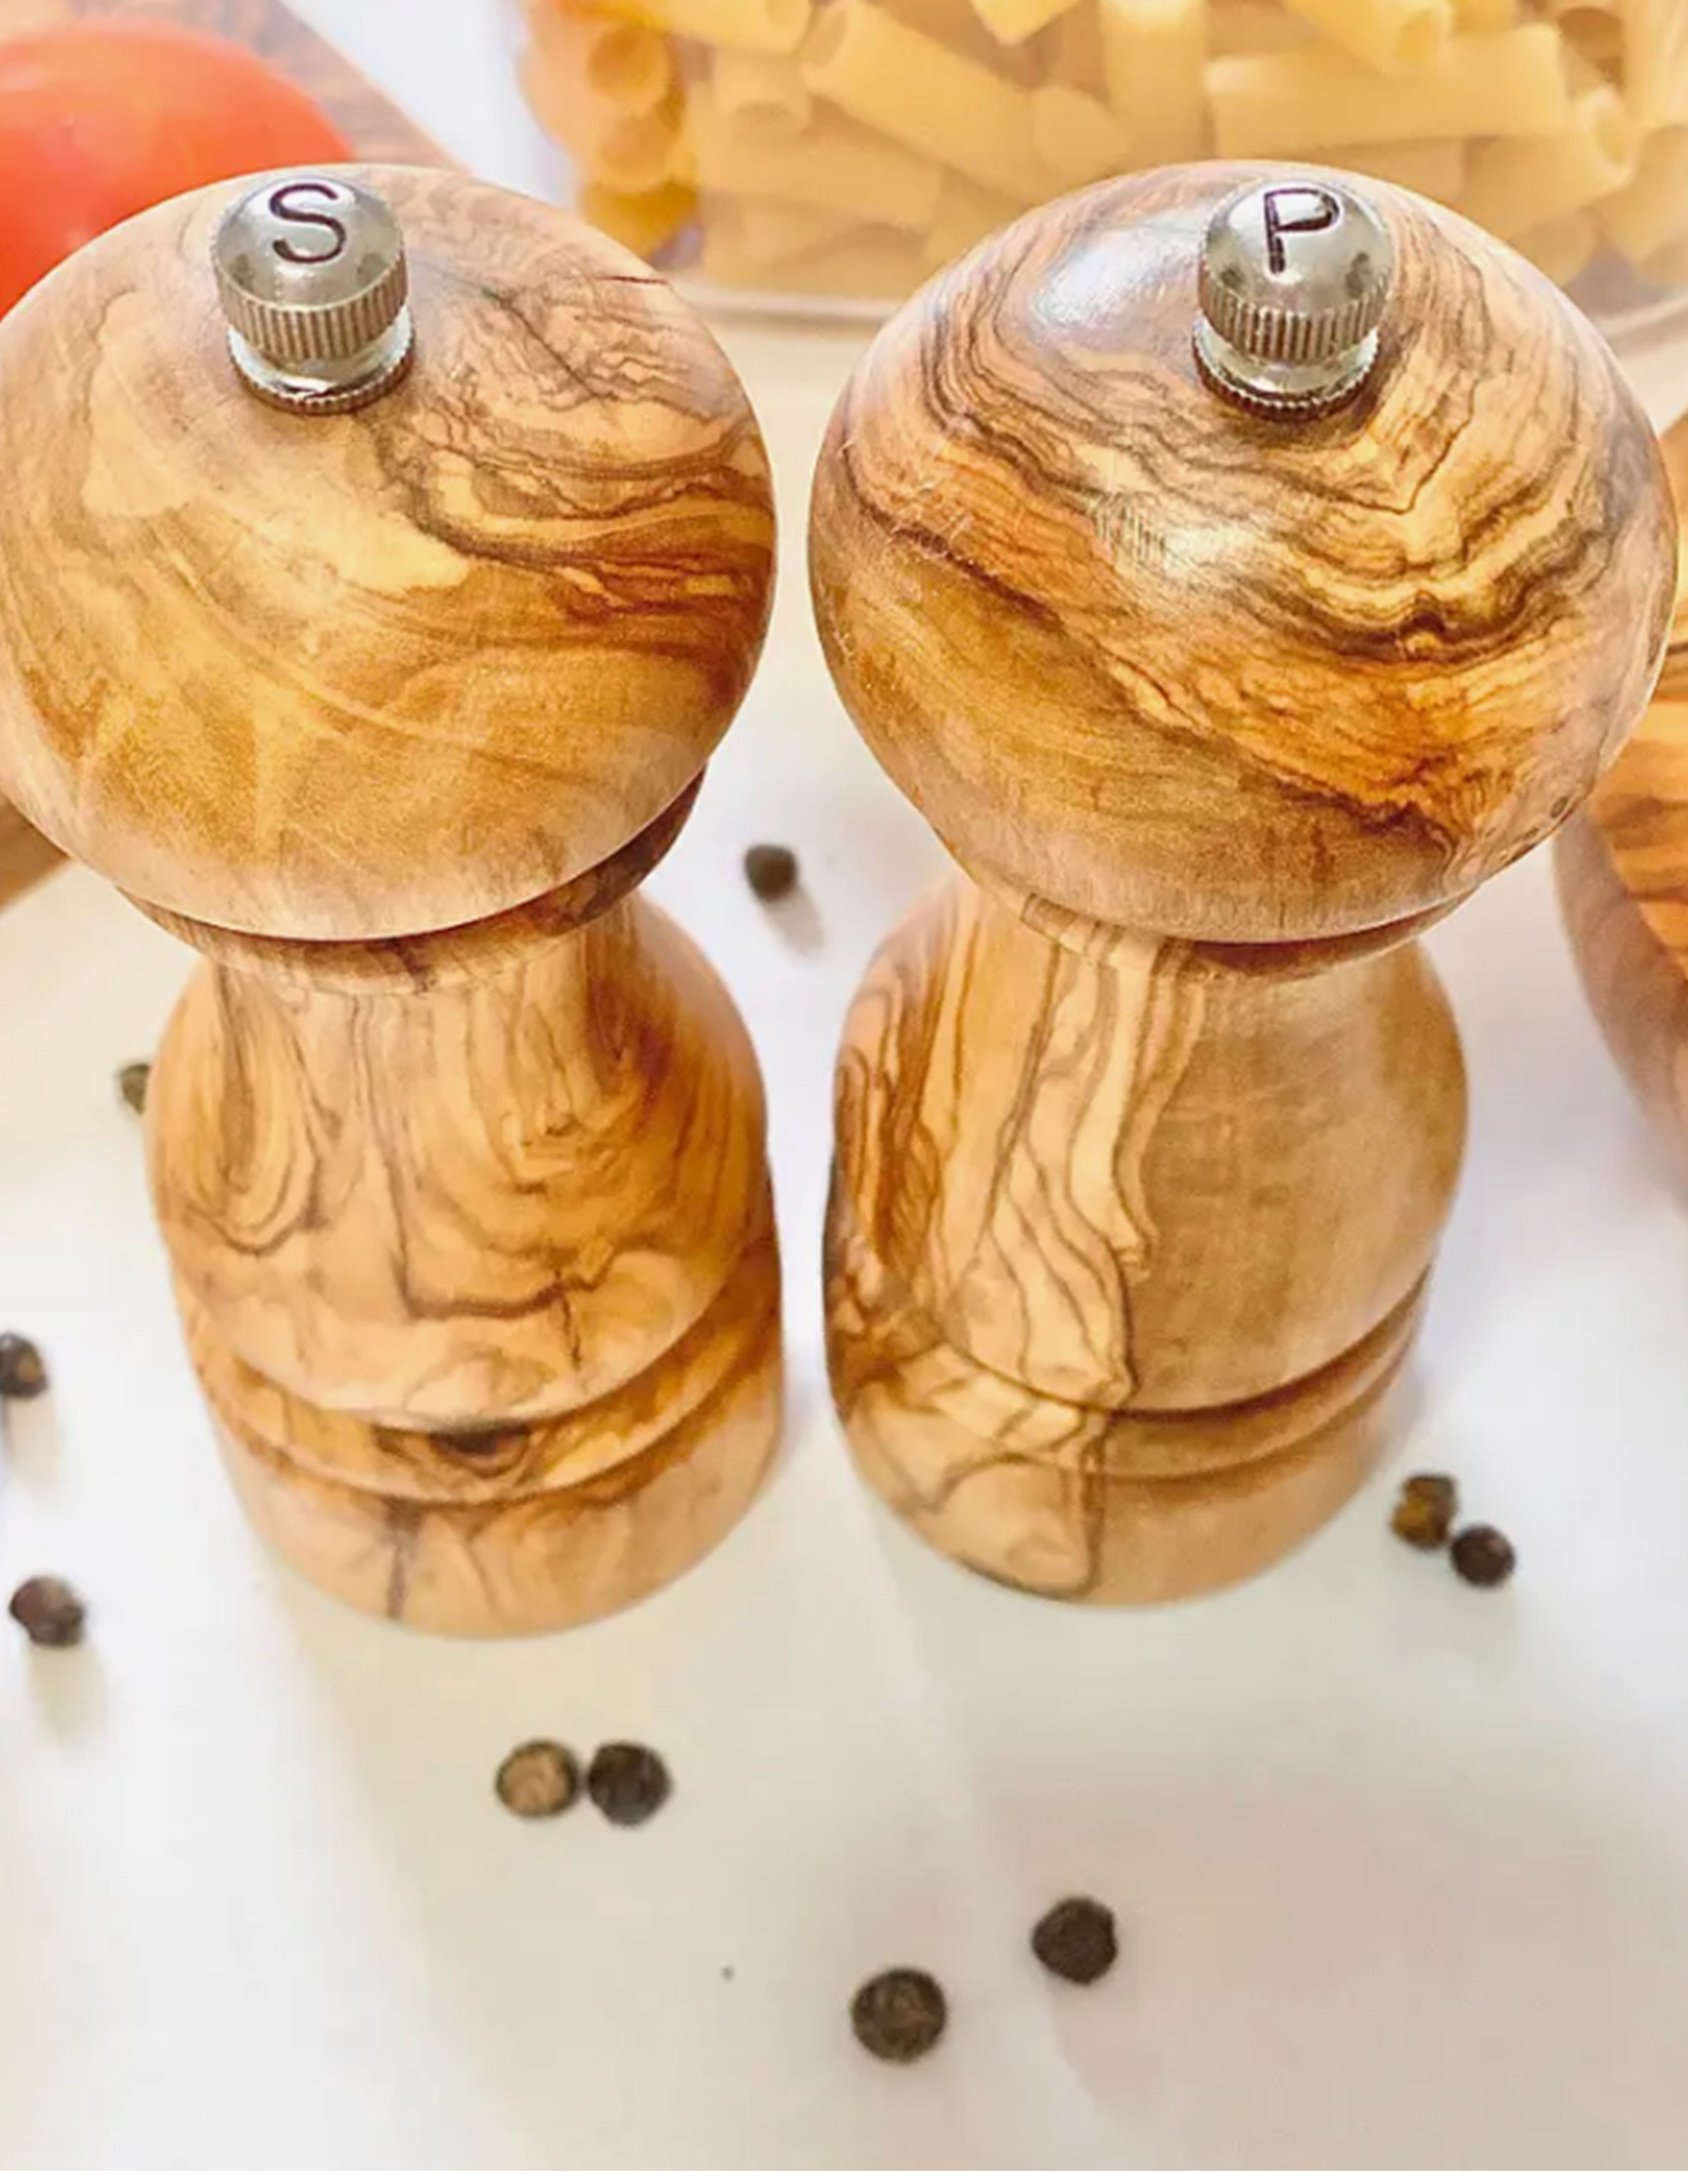 Salt And Pepper Mill Made Of Wood And Ceramic - Pepper Shaker